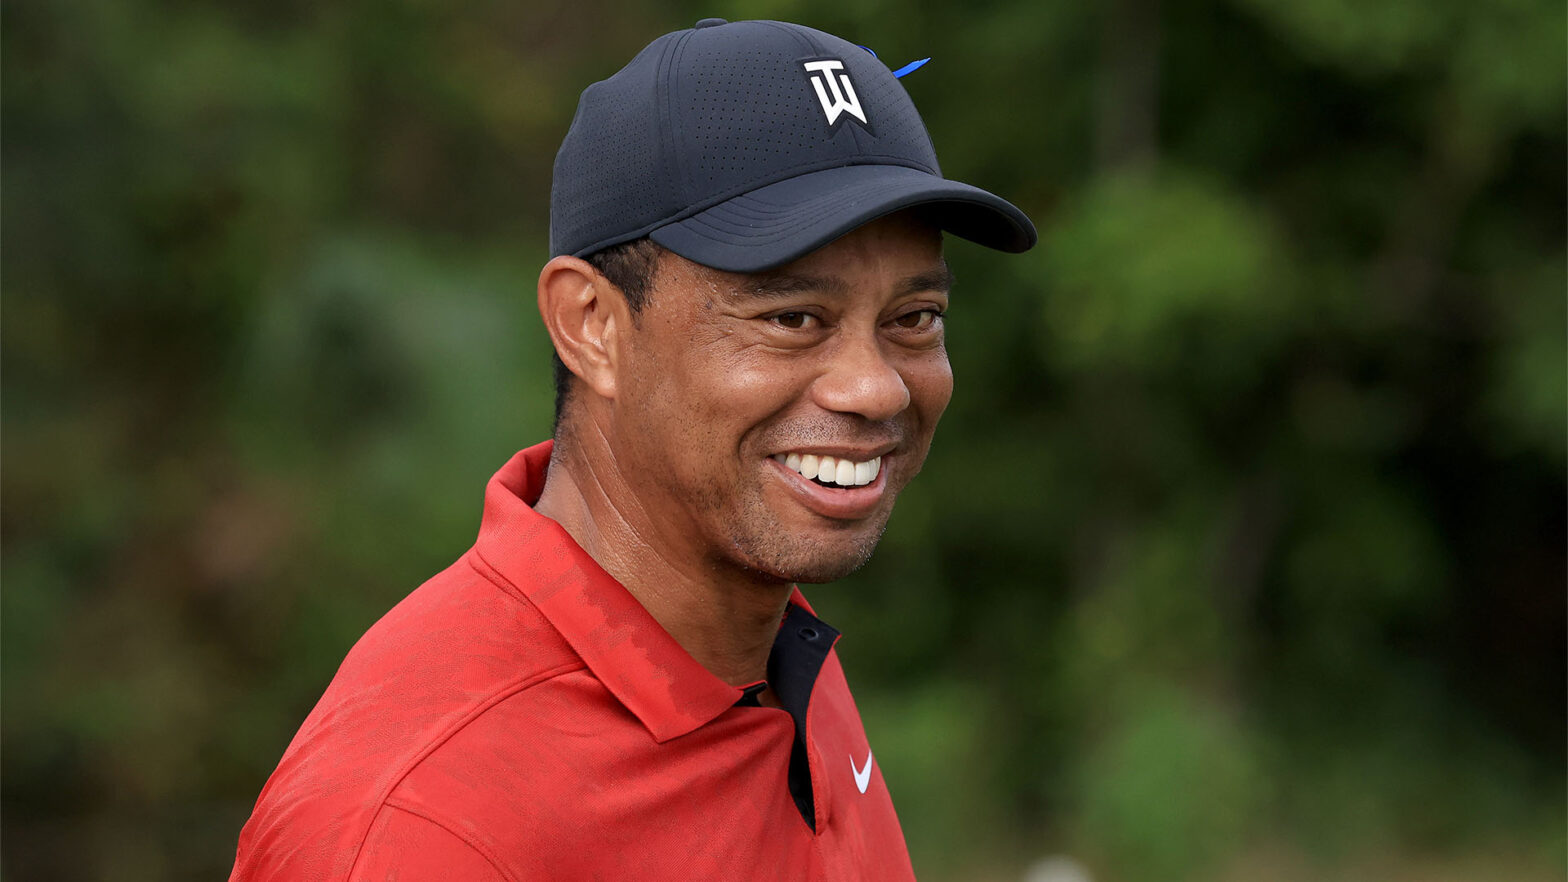 tiger woods says new program allowing pga tour players to collectively access over $1.5b in equity is ‘sports history’